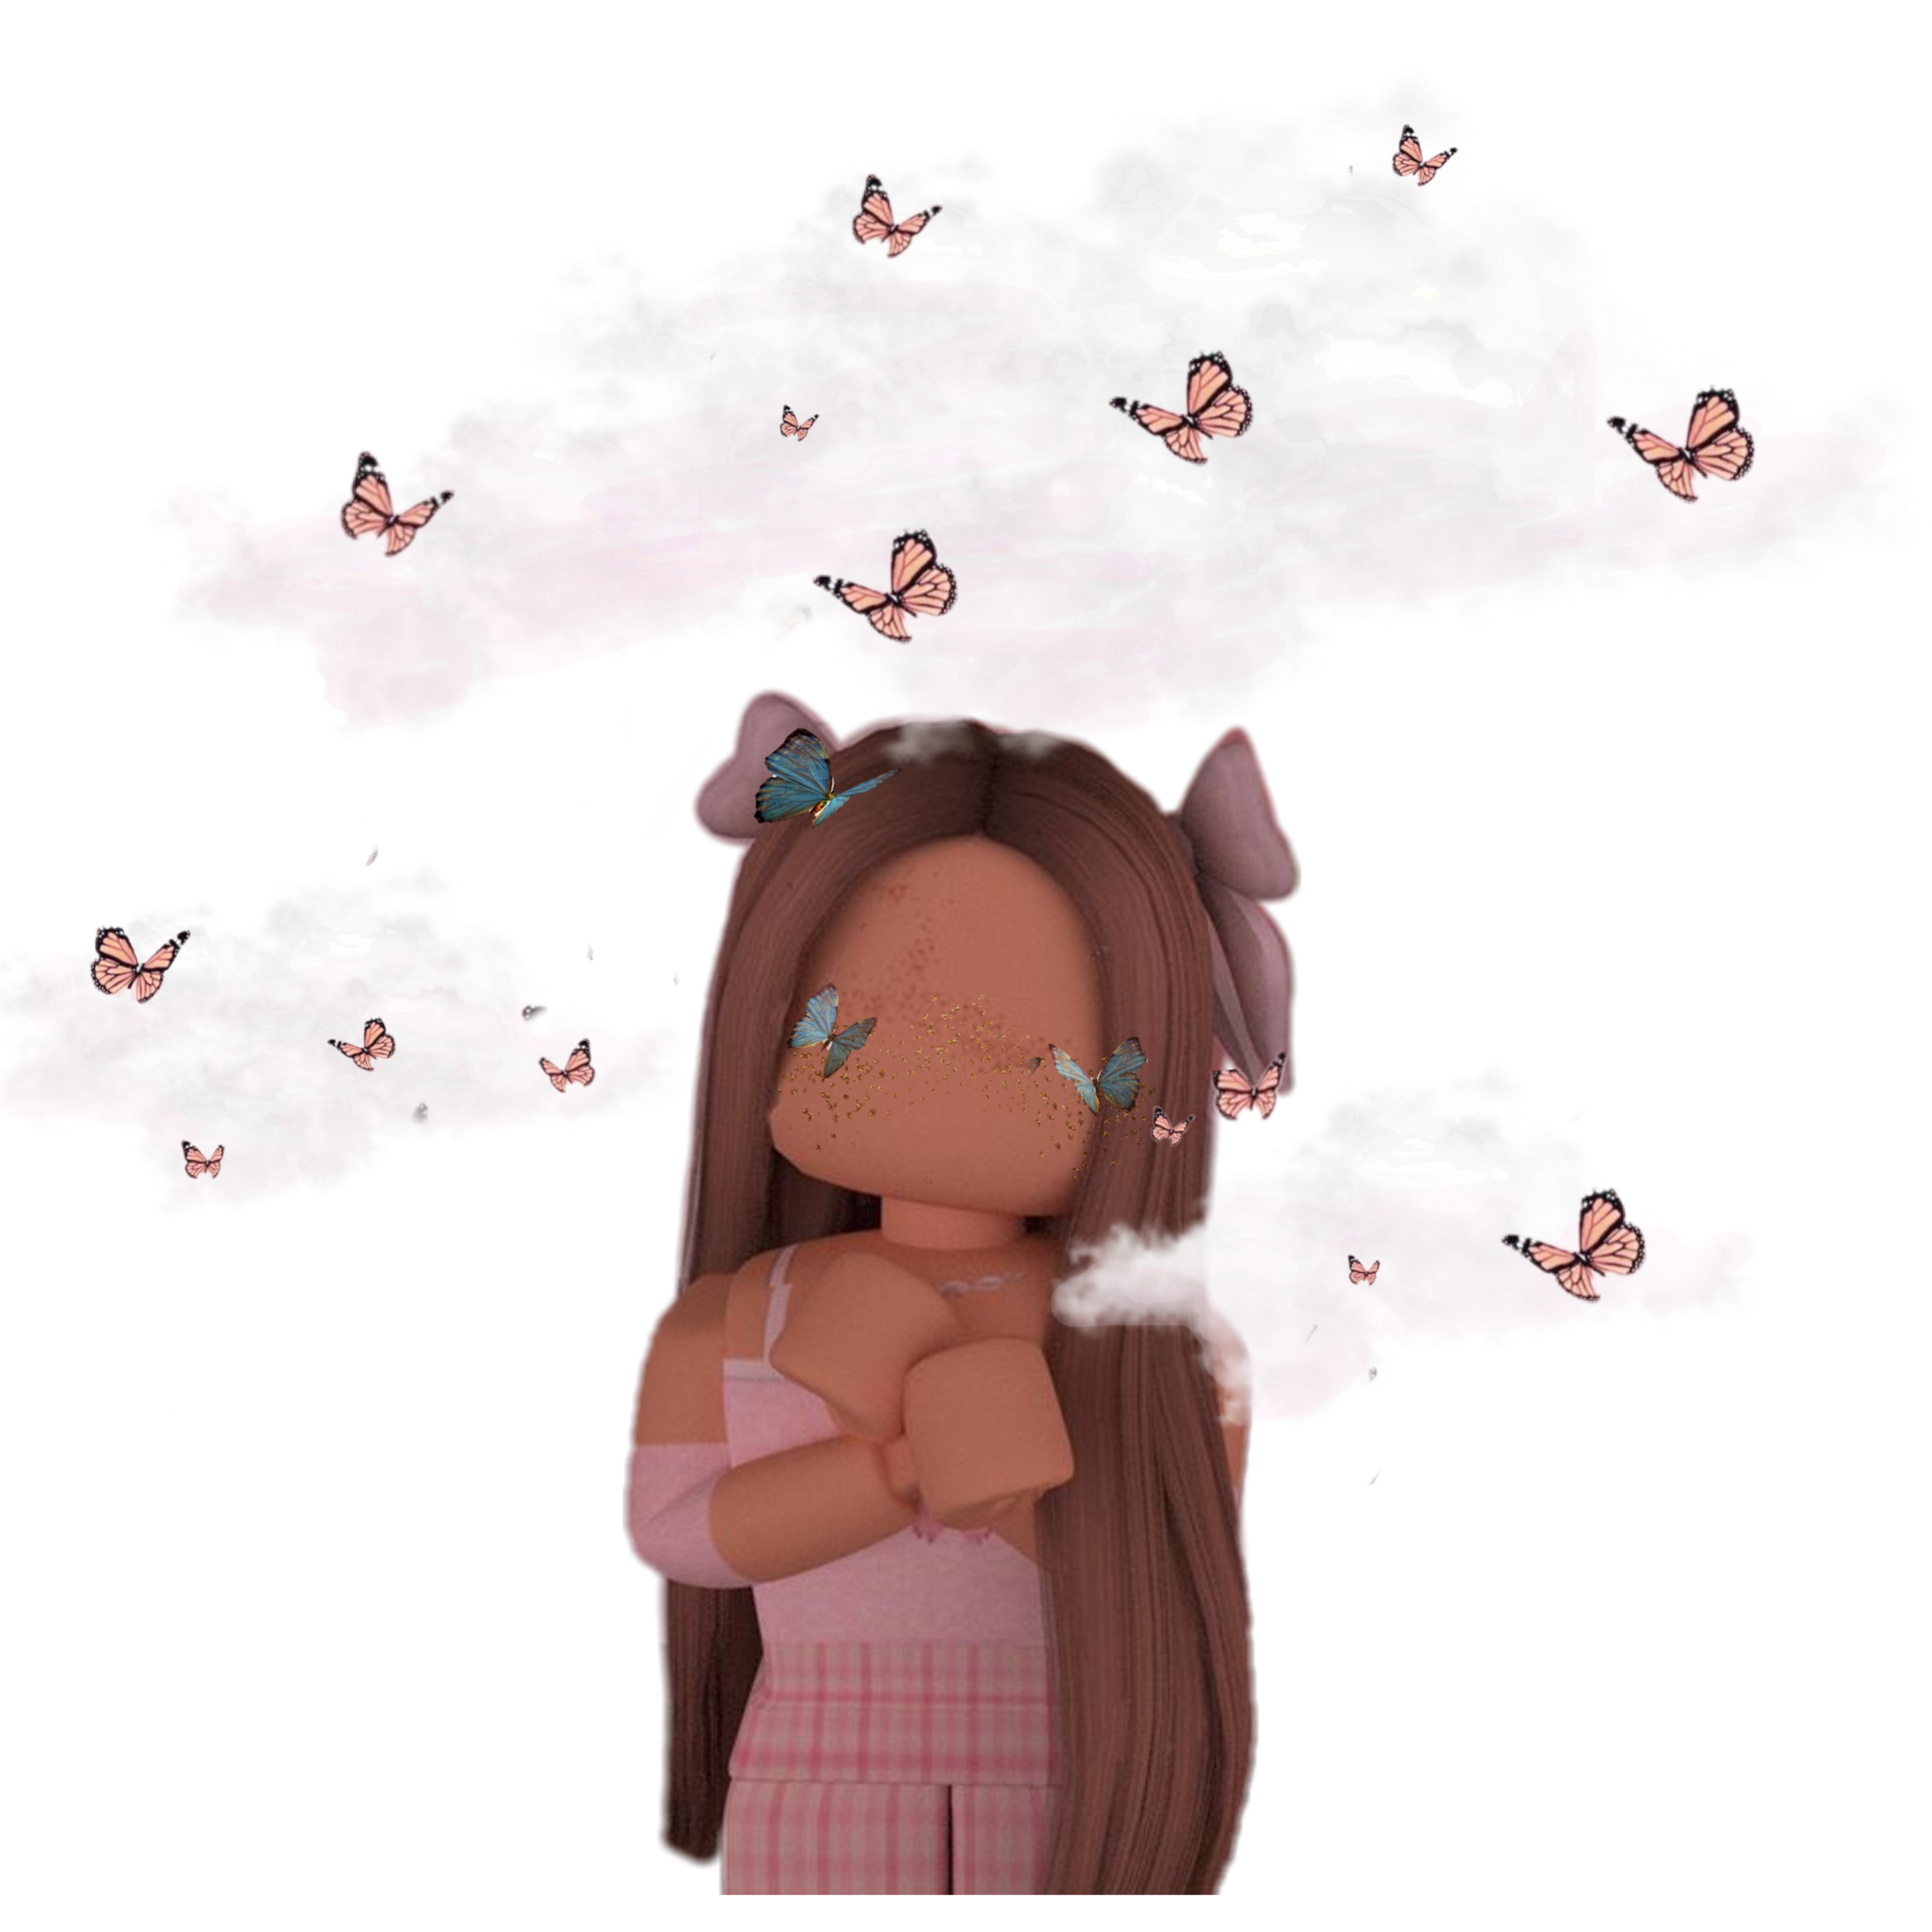 Sticker By 𝒜ℯ𝓈𝓉𝒽ℯ𝓉𝒾𝒸𝓈 By 𝓁ℯ𝓍𝒾 - cloud roblox cloud roblox